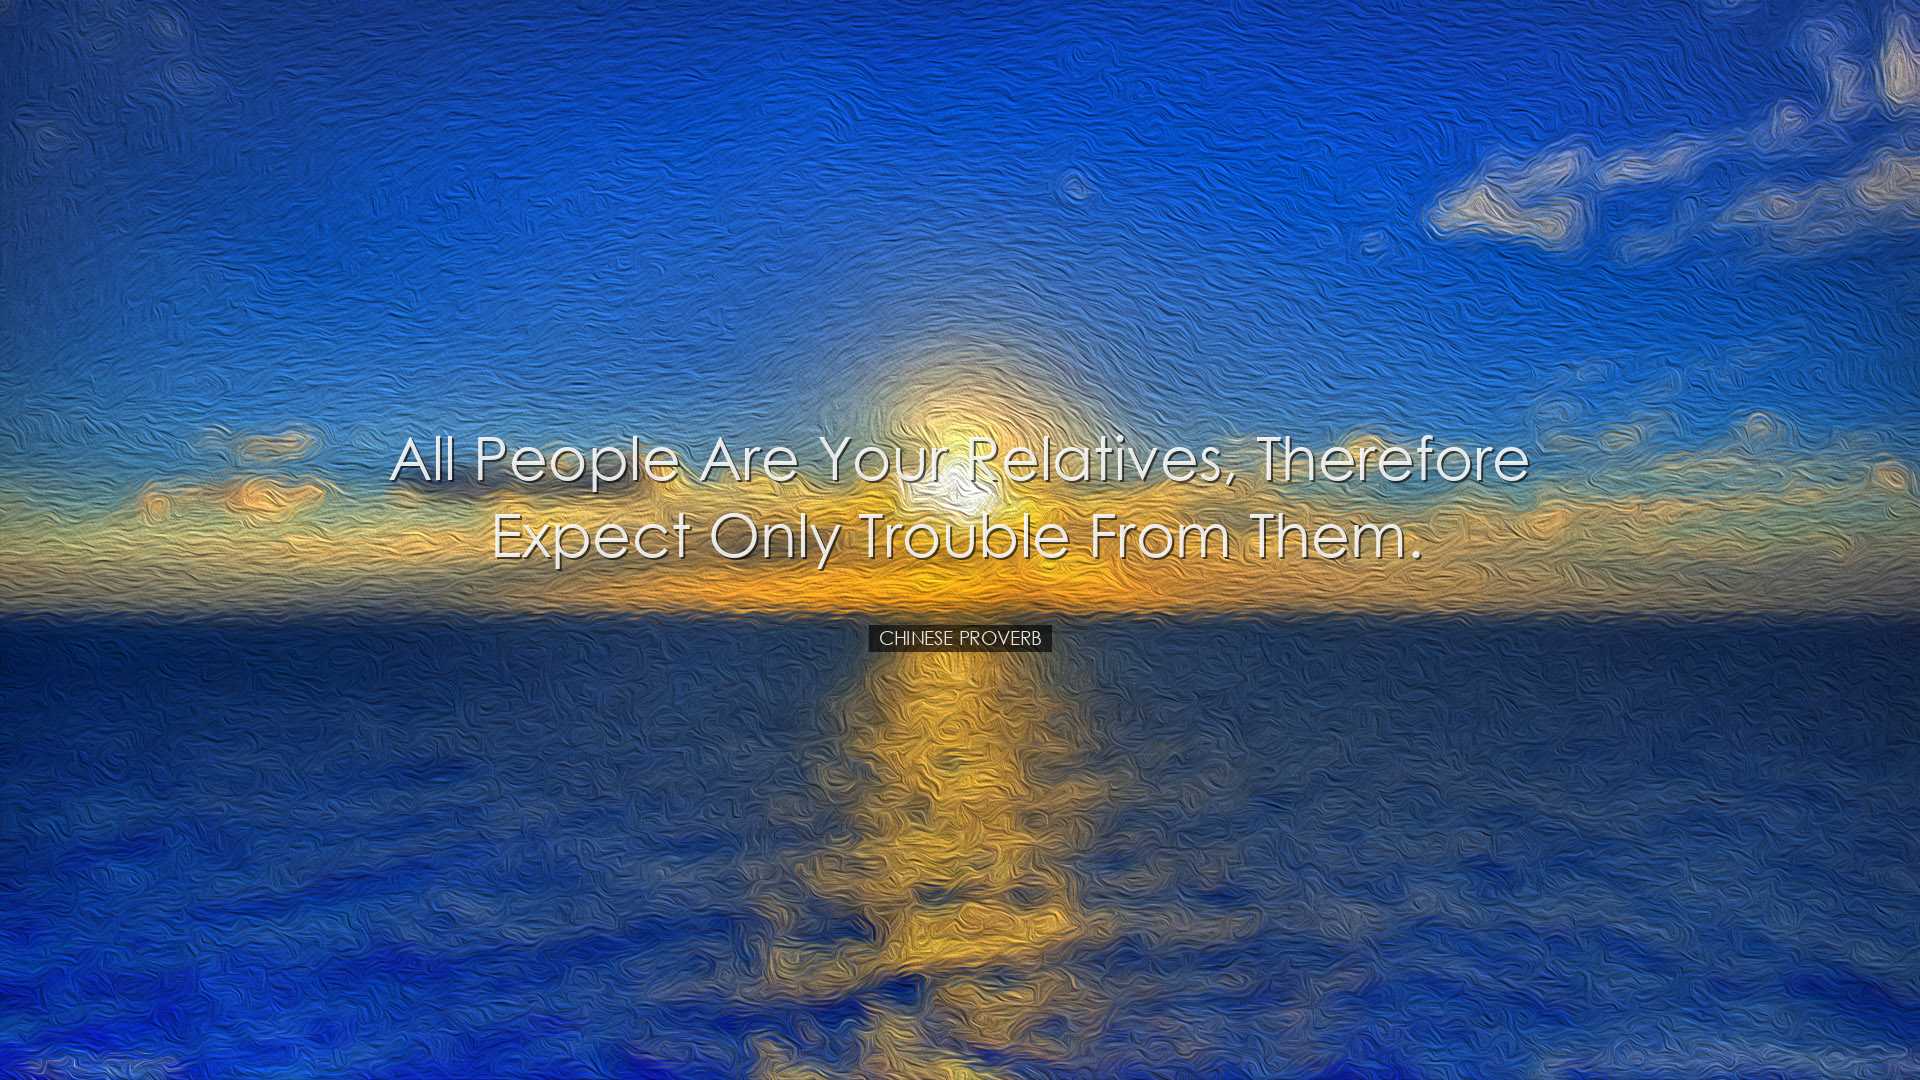 All people are your relatives, therefore expect only trouble from